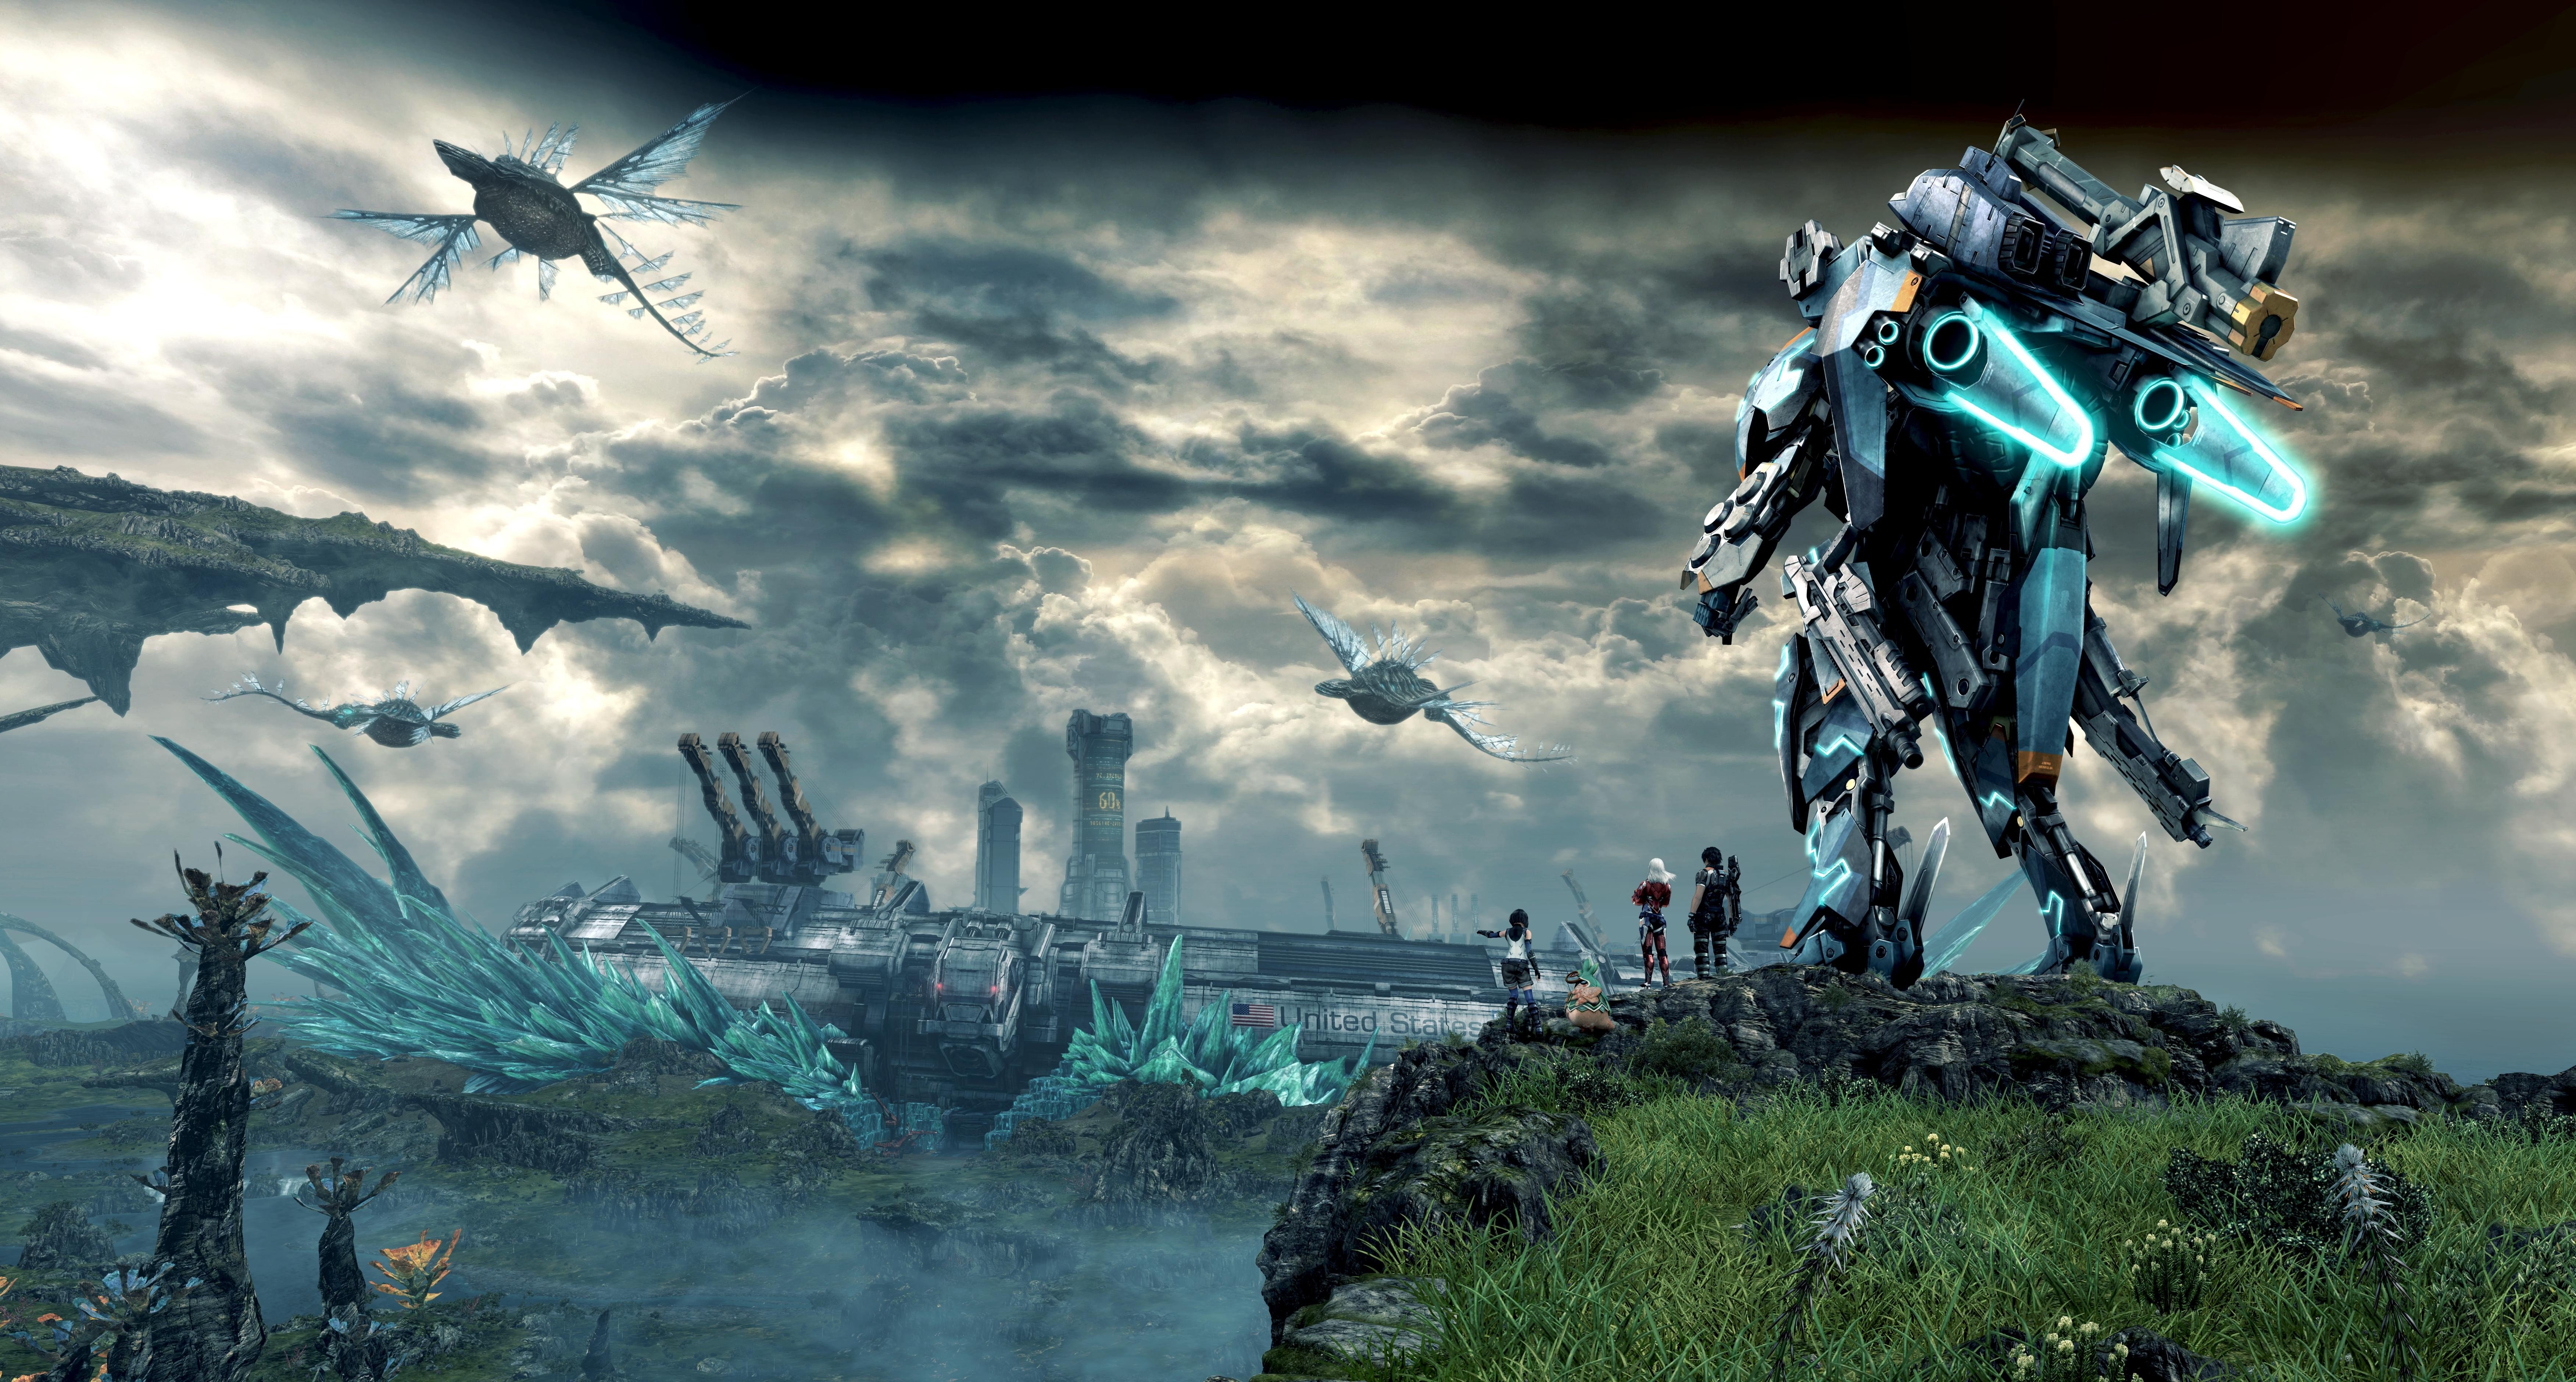 Nintendo Xenoblade Chronicles X Monolith Soft Wii U Jrpgs Hd Wallpapers Desktop And Mobile Images Photos